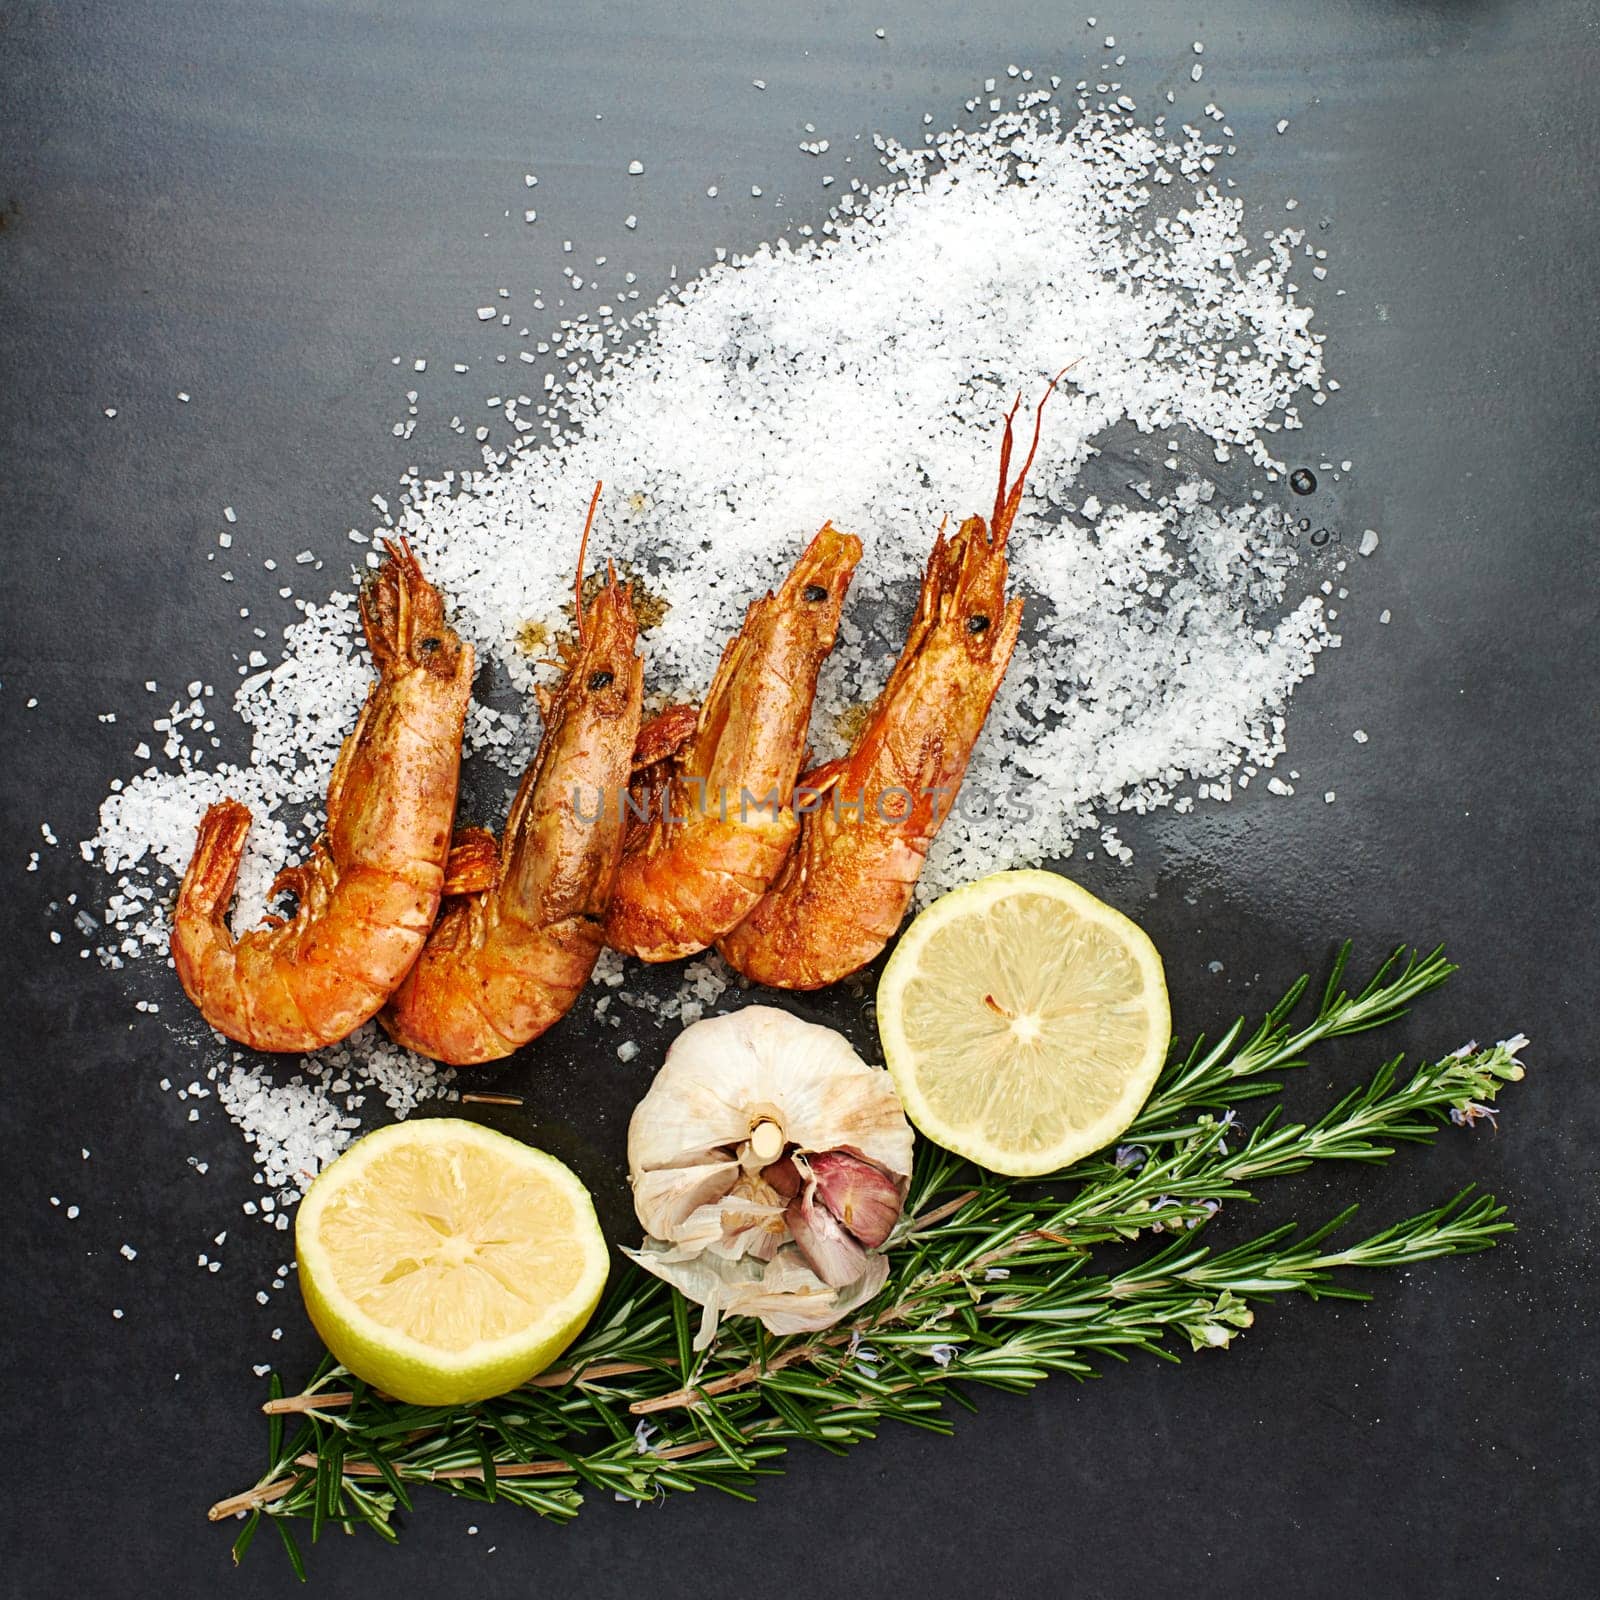 Healthy, food and prawns with herbs on table for natural, organic and nutrition to prepare seafood dish. Pescatarian, fish and protein with minerals to prevent cancer to diet for weight loss by YuriArcurs